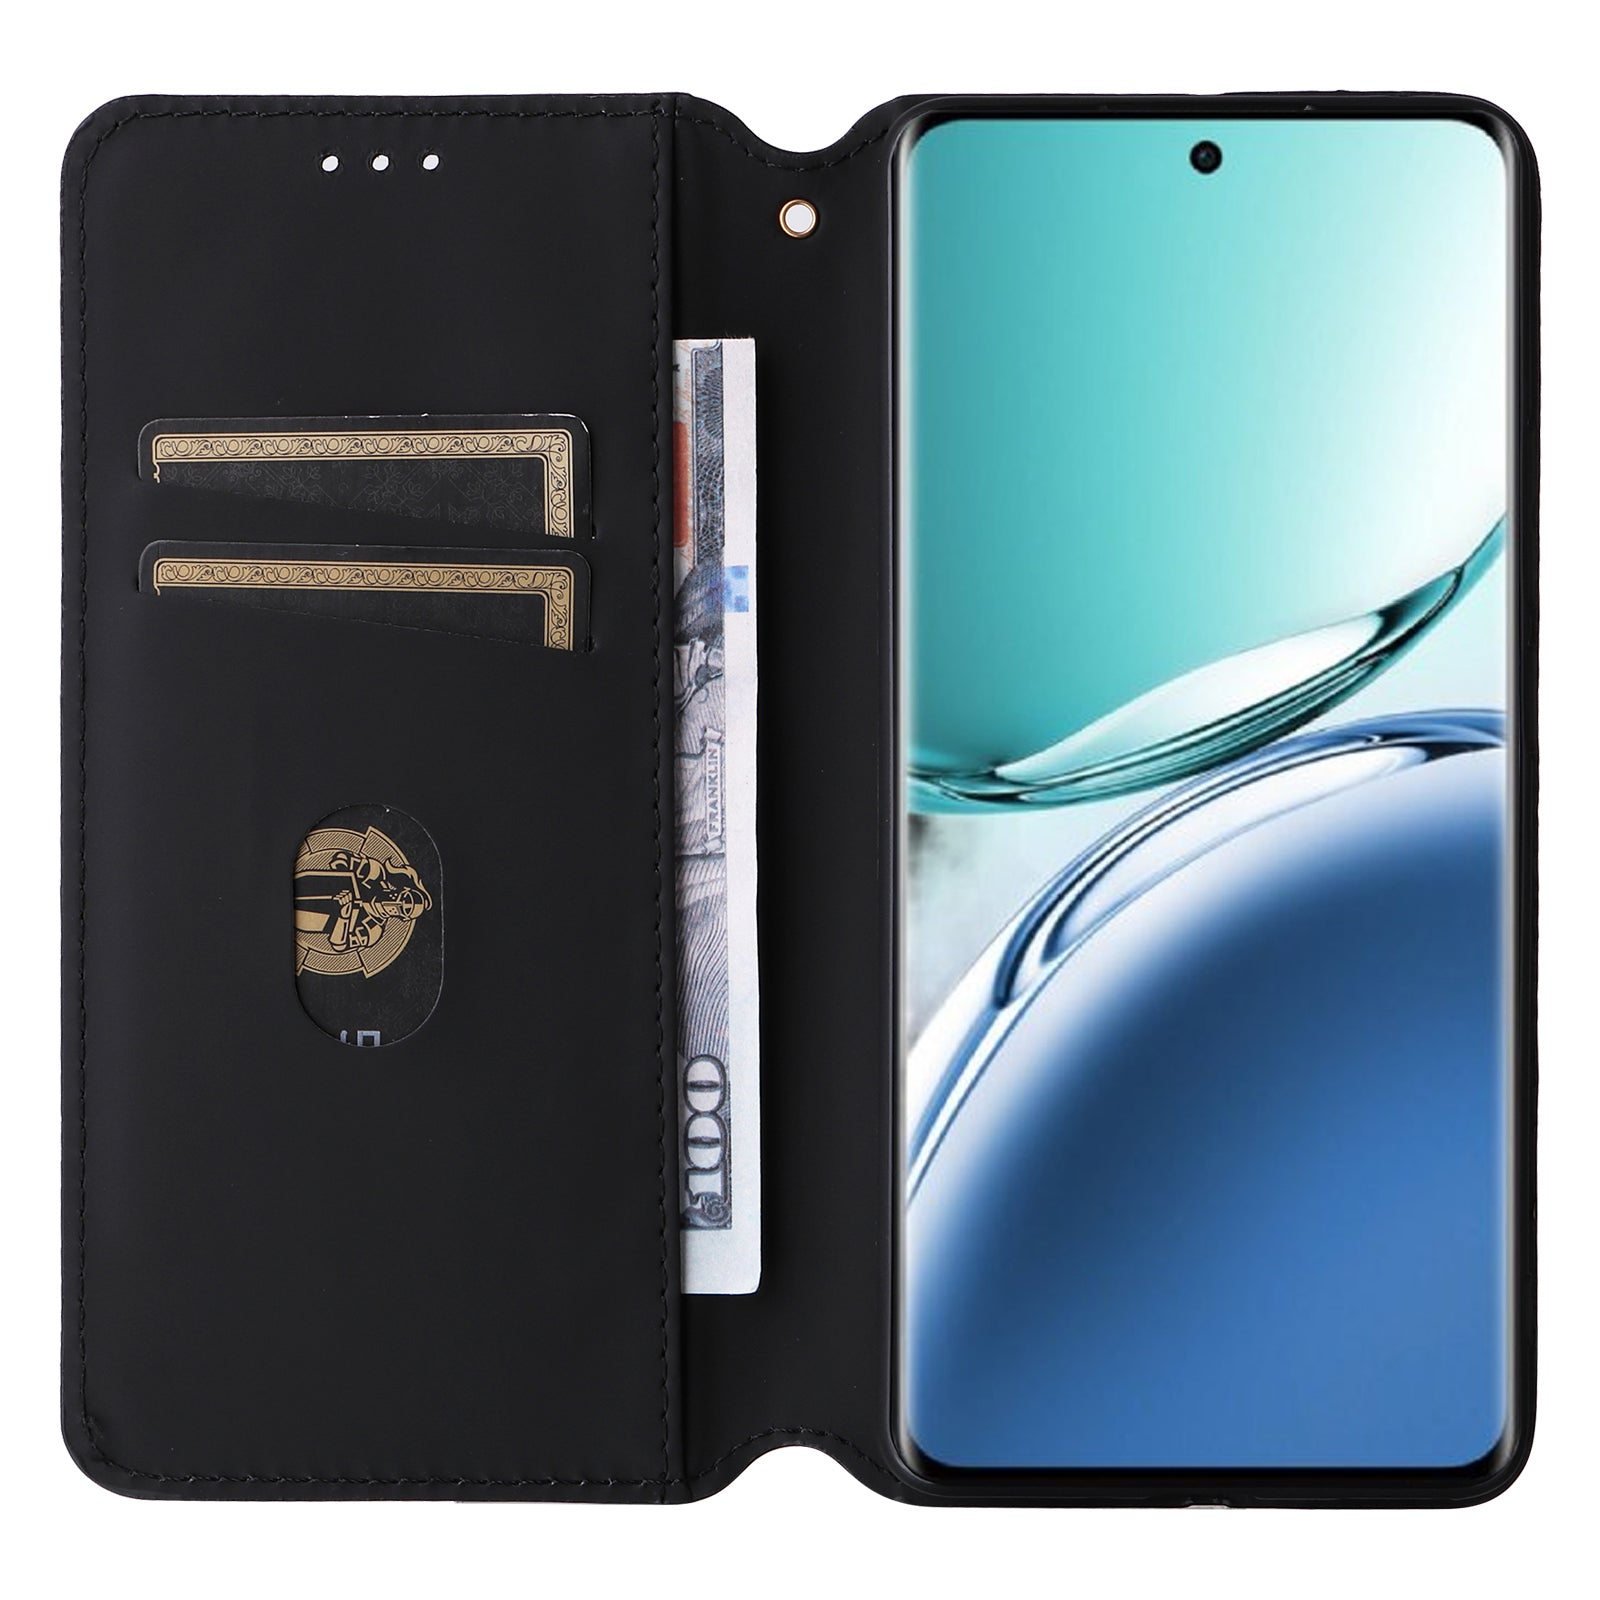 For Oppo A3 Pro 5G Leather Wallet Flip Cover Mobile Phone Case Wholesale - Black